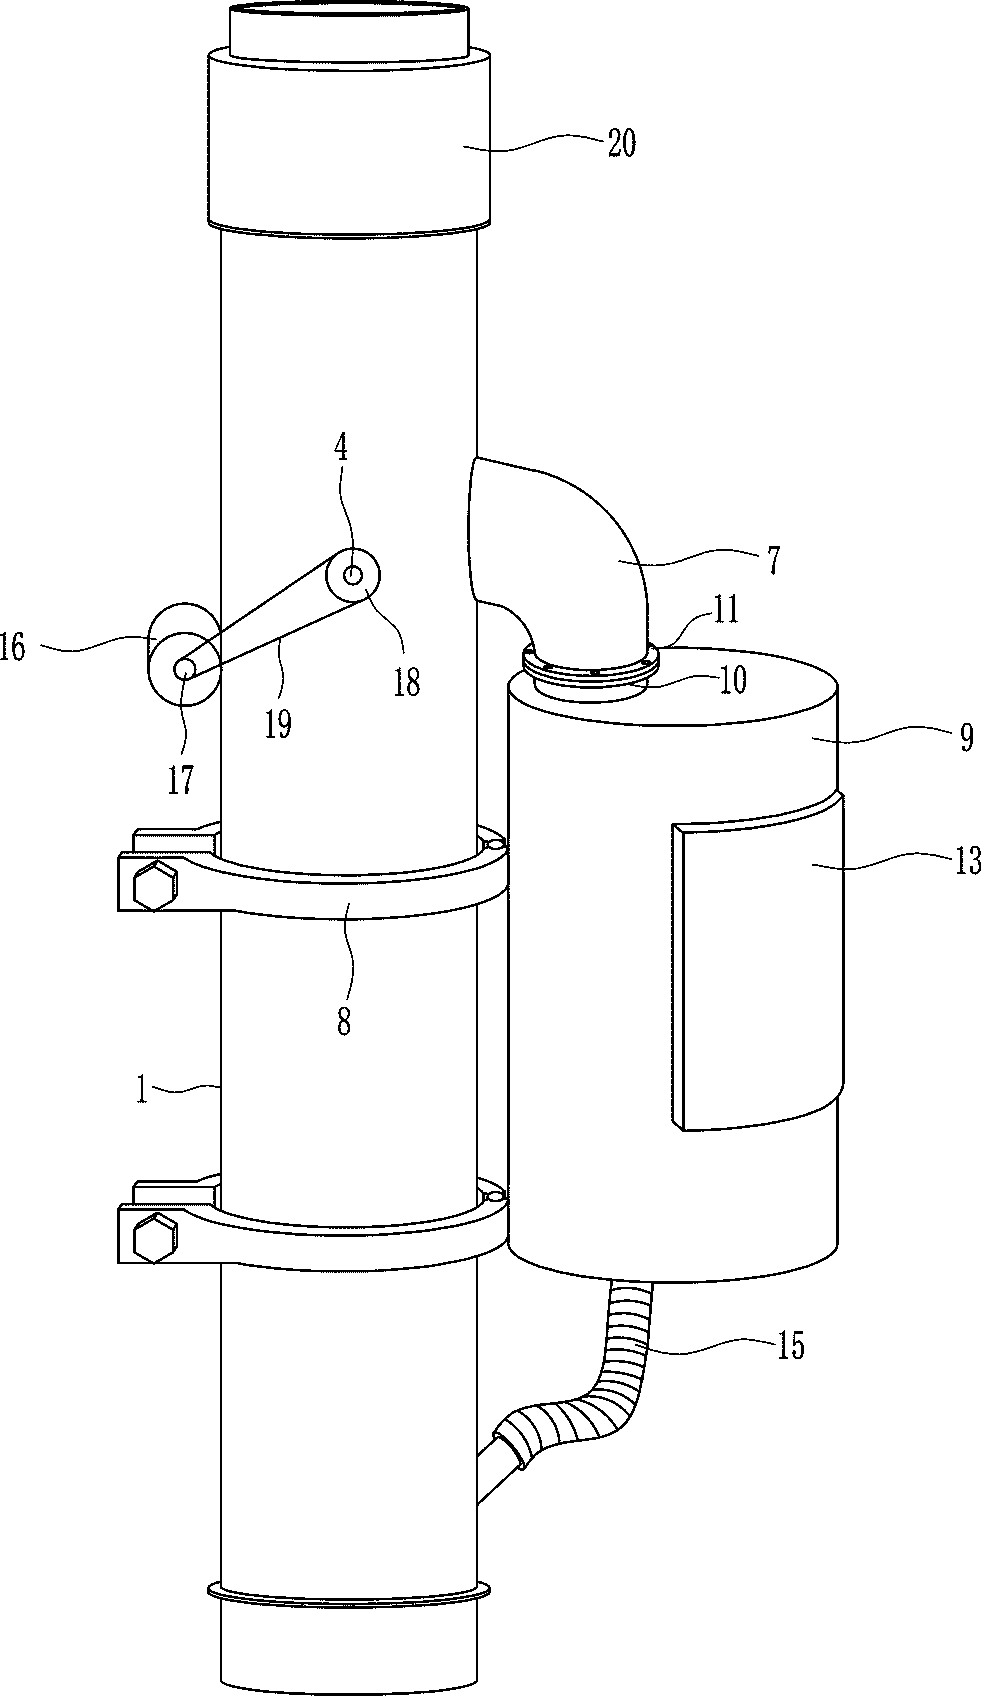 A roof drainage impurity and water separation device